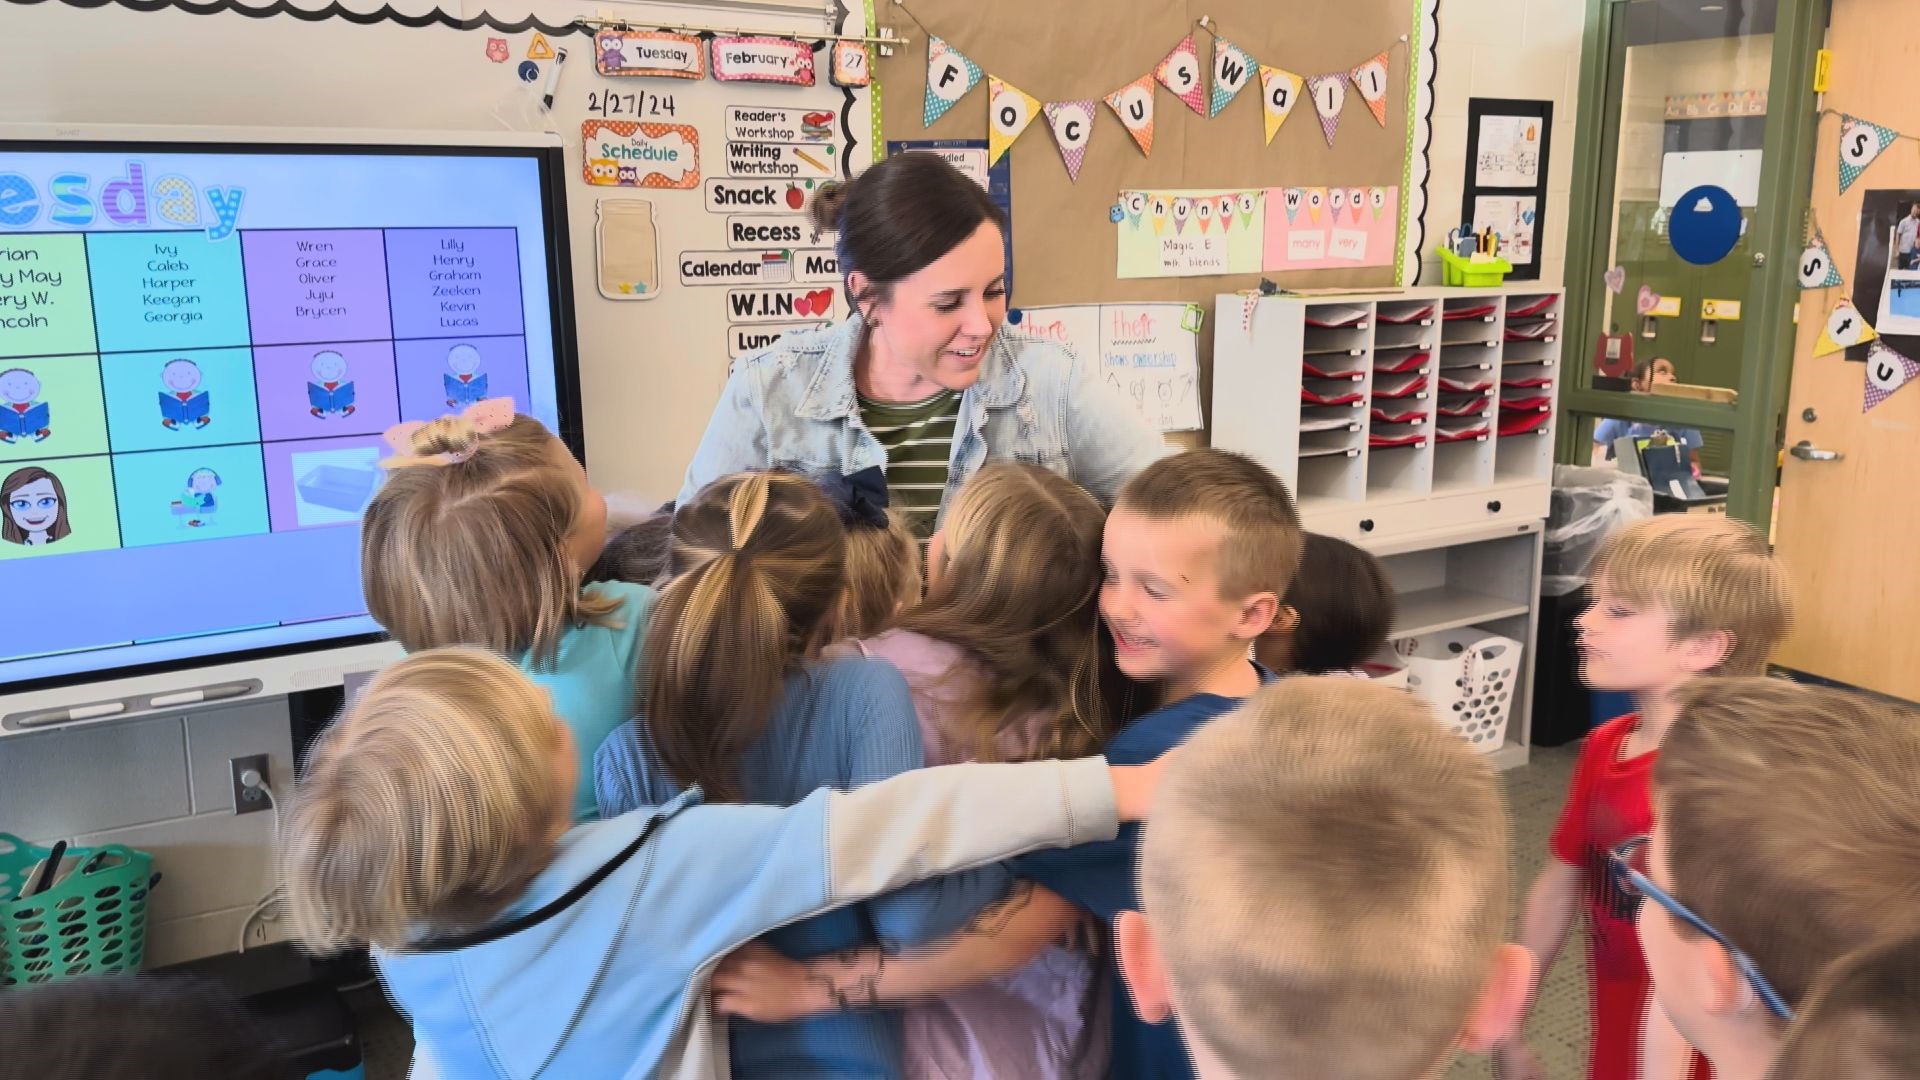 13 ON YOUR SIDE was in Zeeland at Adams Elementary School for our latest Teacher of the Week surprise. A group of first graders eagerly helped us with the reveal.